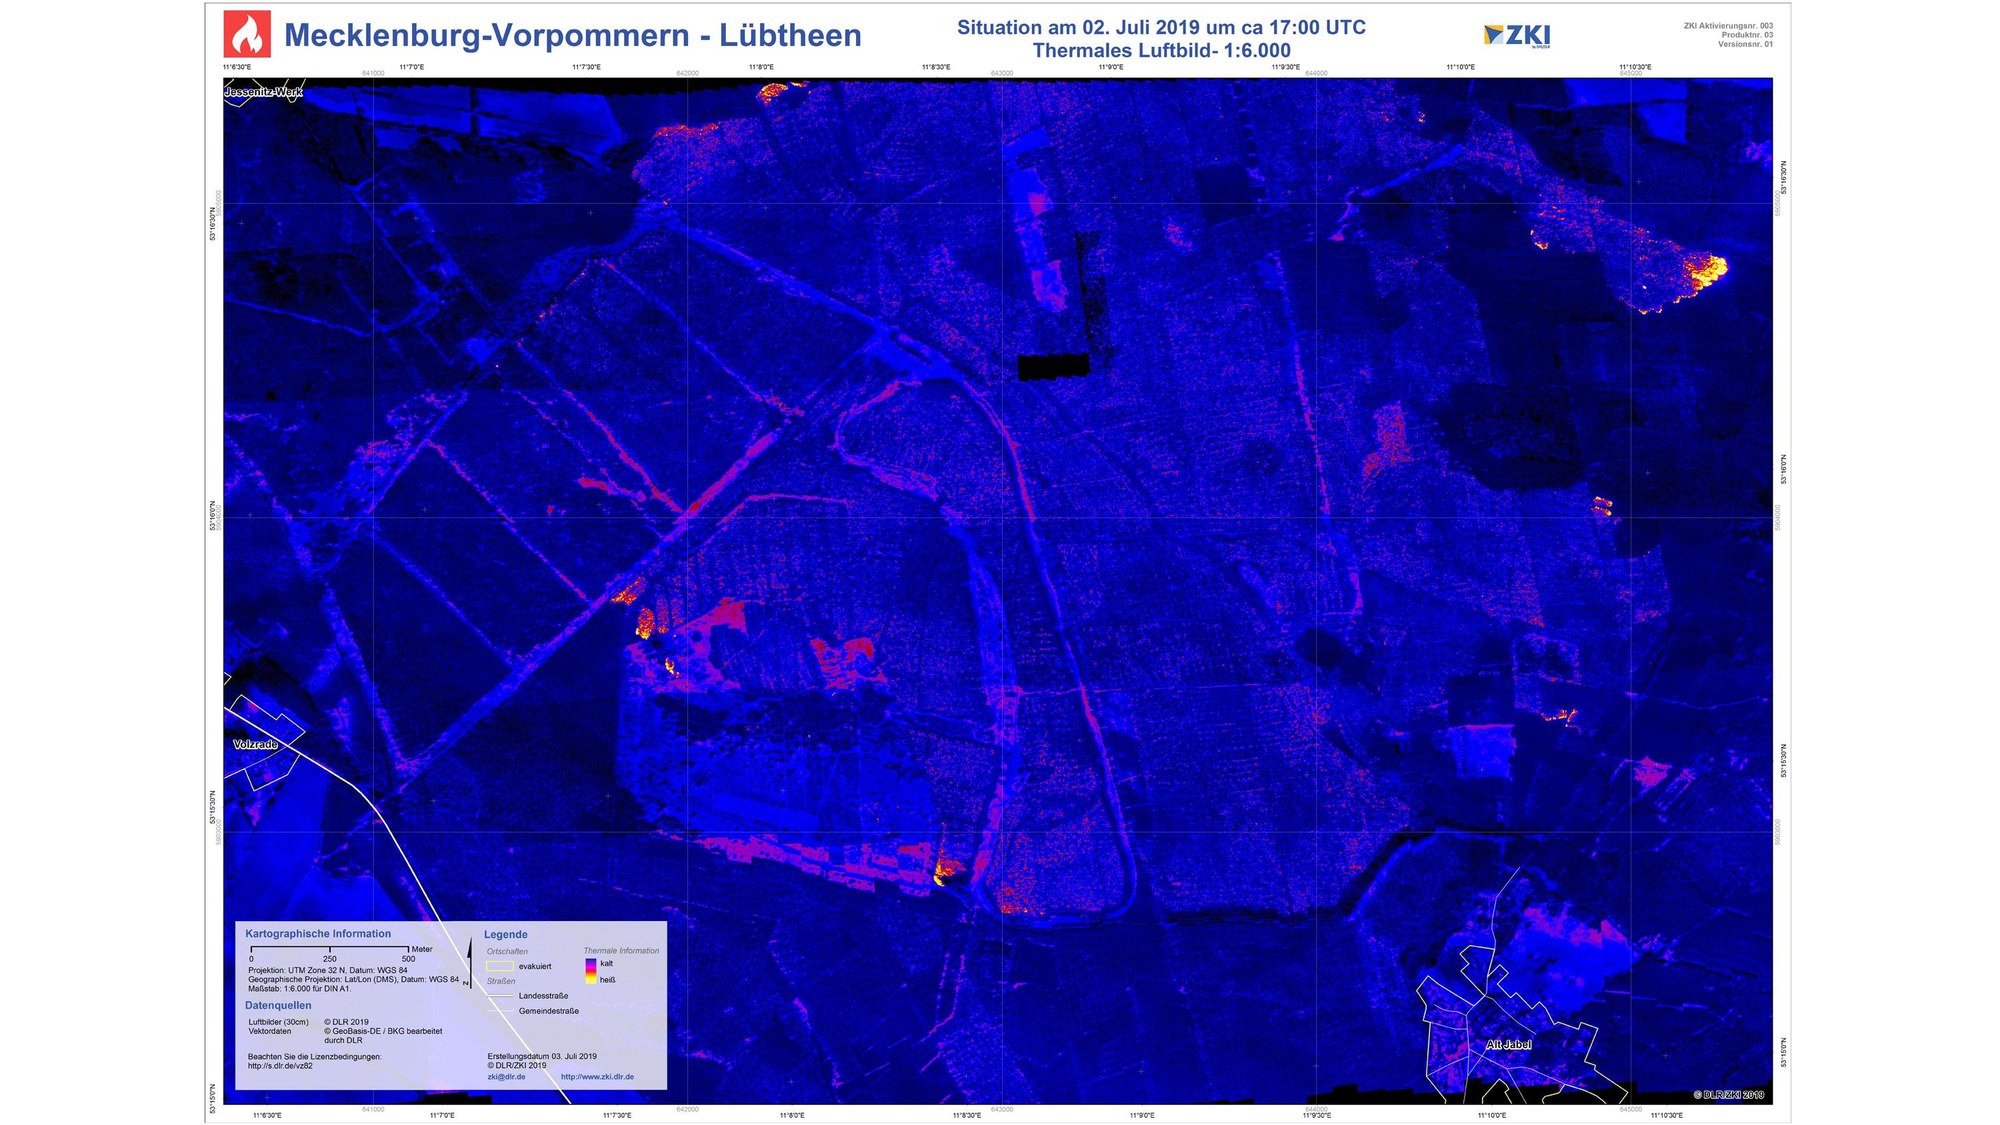 MACS thermal data in ZKI’s situation image format.